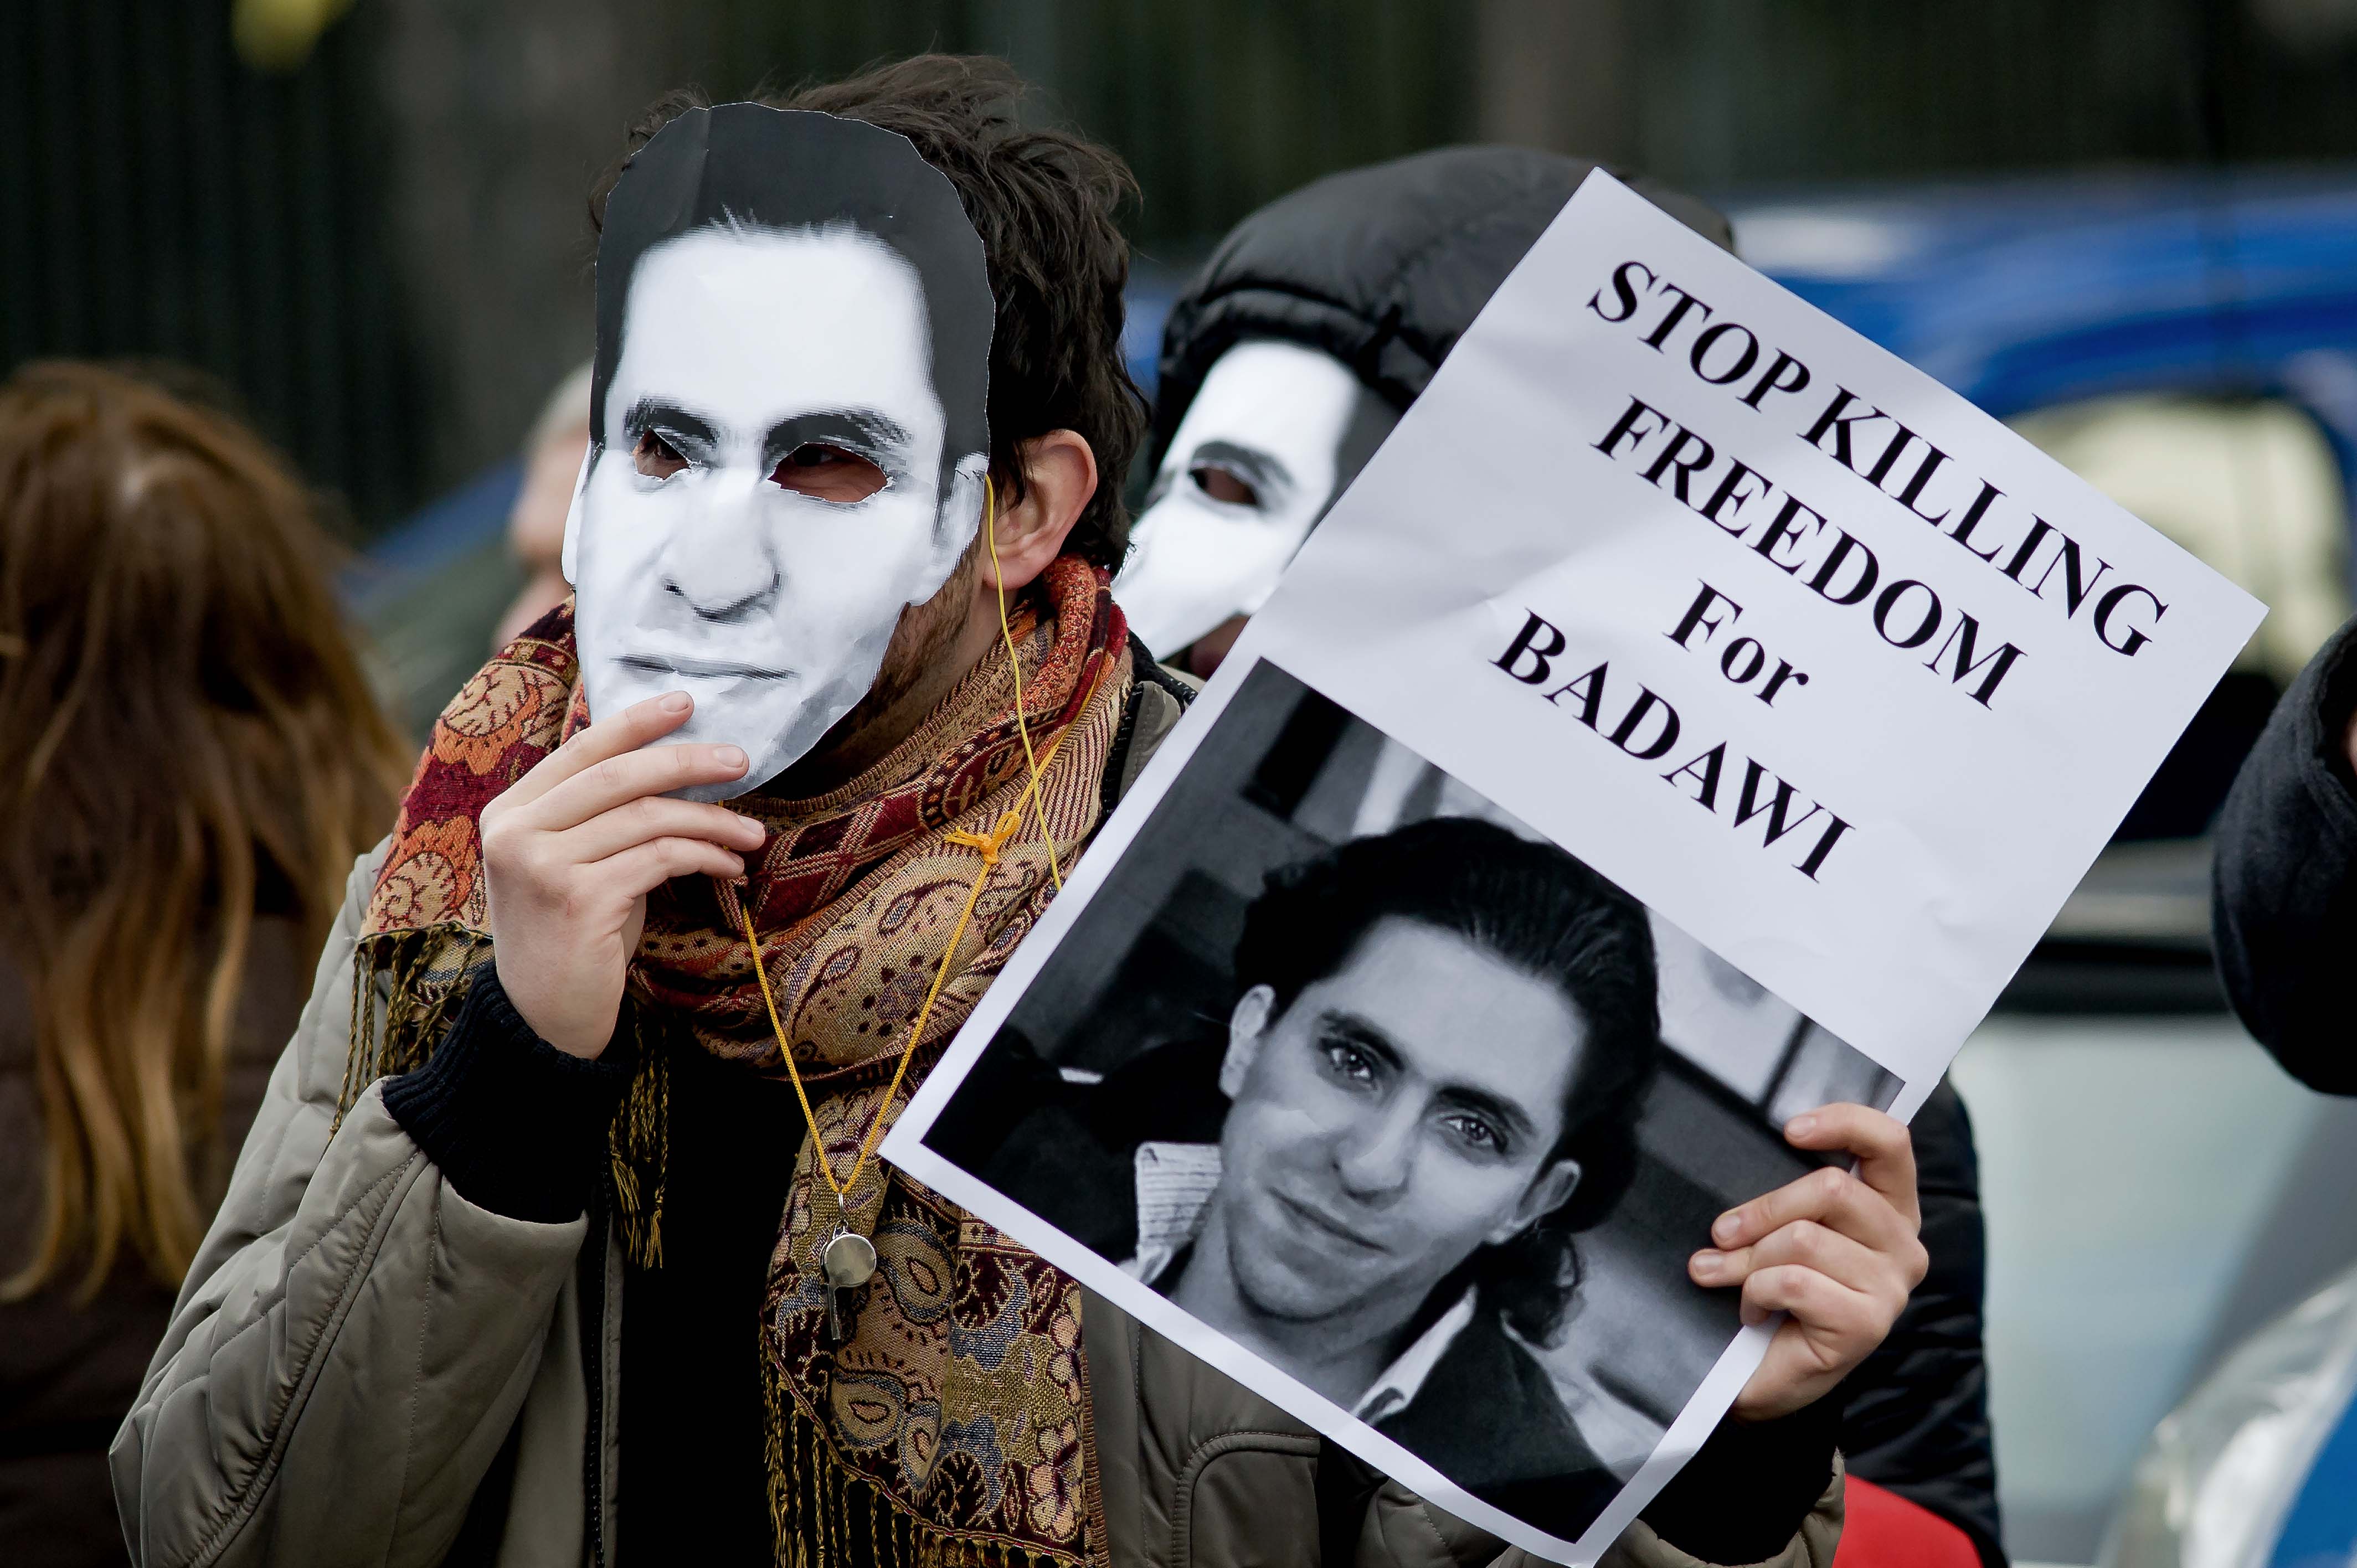 Rome, Italy. 9th January 2015 -- Protestors with masks of Raif Badaw, protesting against the request of the death penalty and calling for the release of blogger. -- Sit-in in front of the Embassy of Saudi Arabia to protest against the flogging and ask for the immediate release of journalist and blogger Saudi Raif Badawi imprisoned on charges of apostasy. Photograph by Stefano Montesi. Copyright: Demotix 